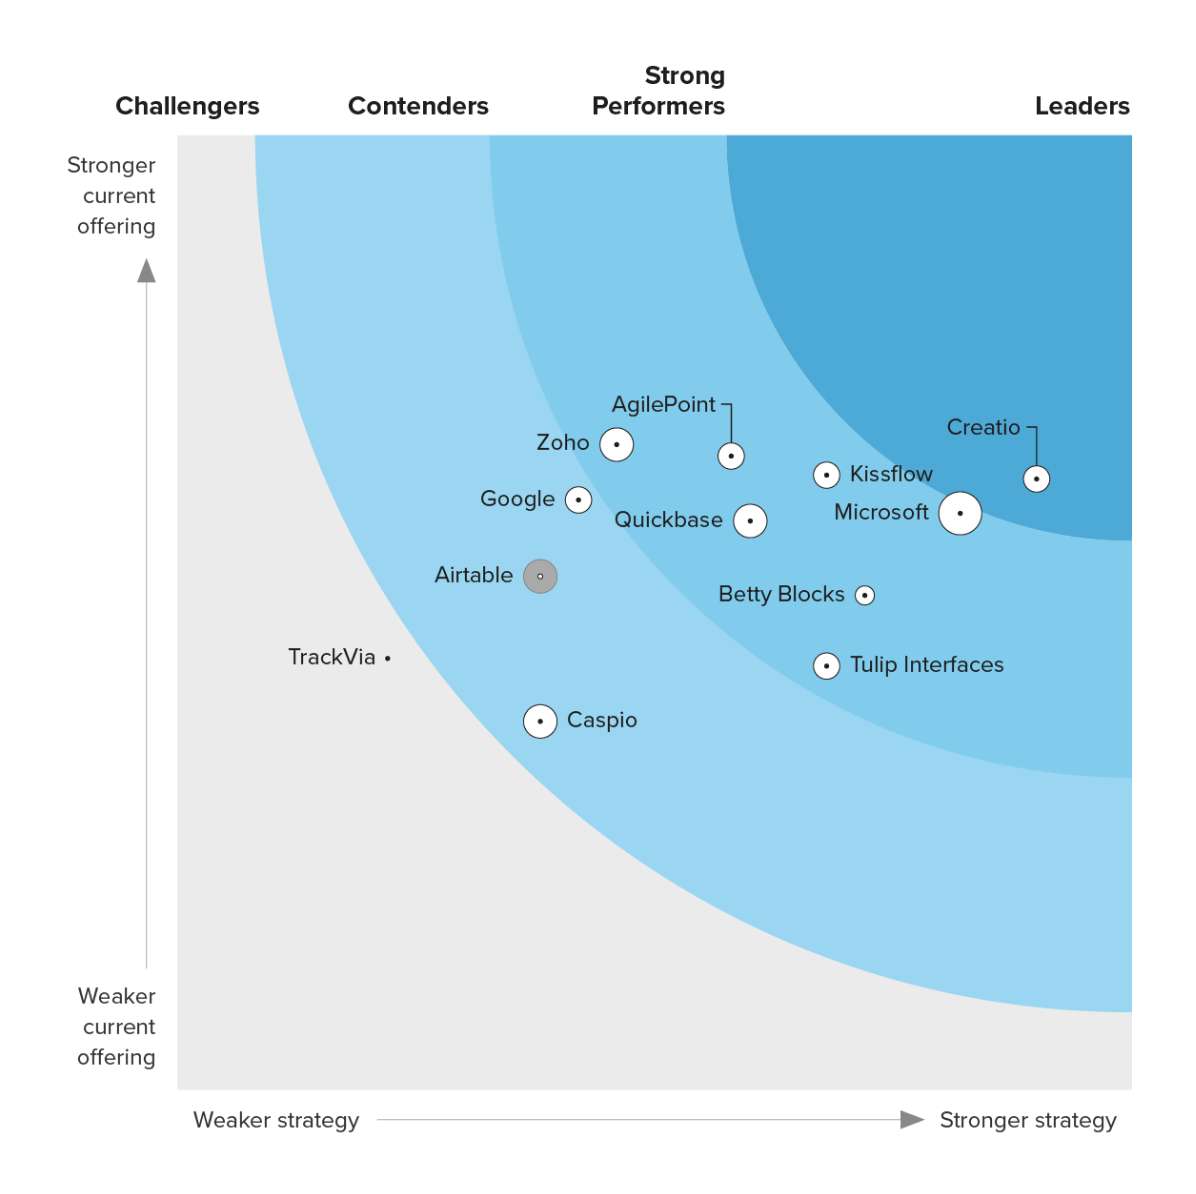 Creatio Leader of the Forrester Wave